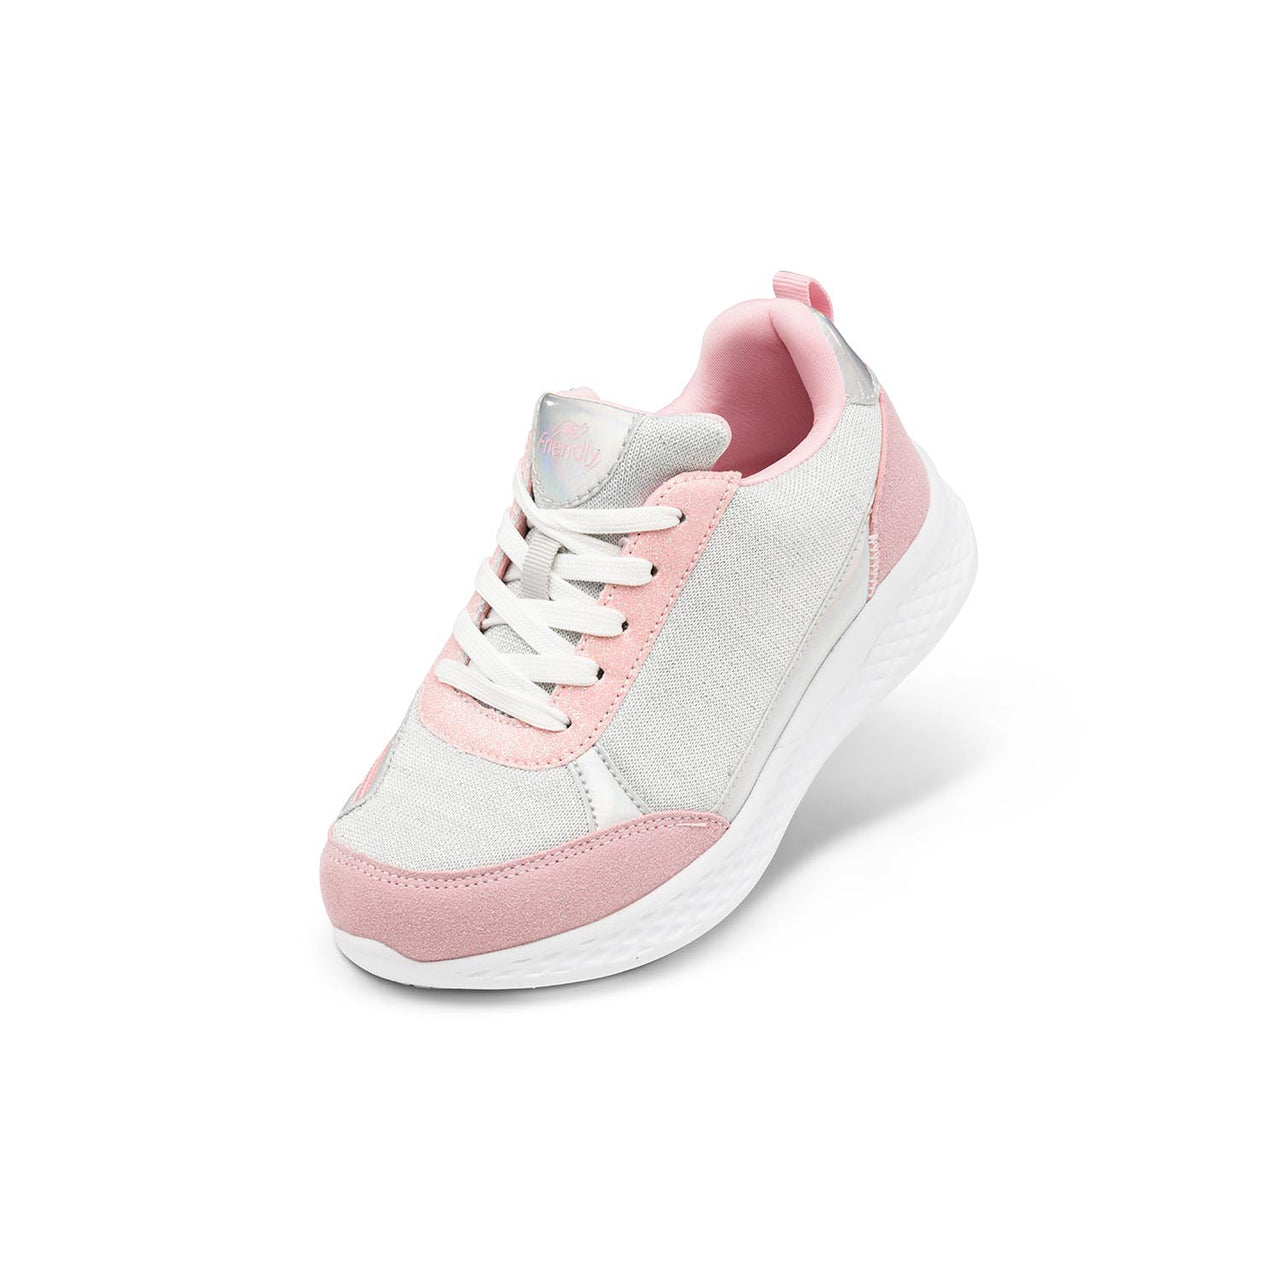 Friendly Shoes Adventure White/Pink/Silver